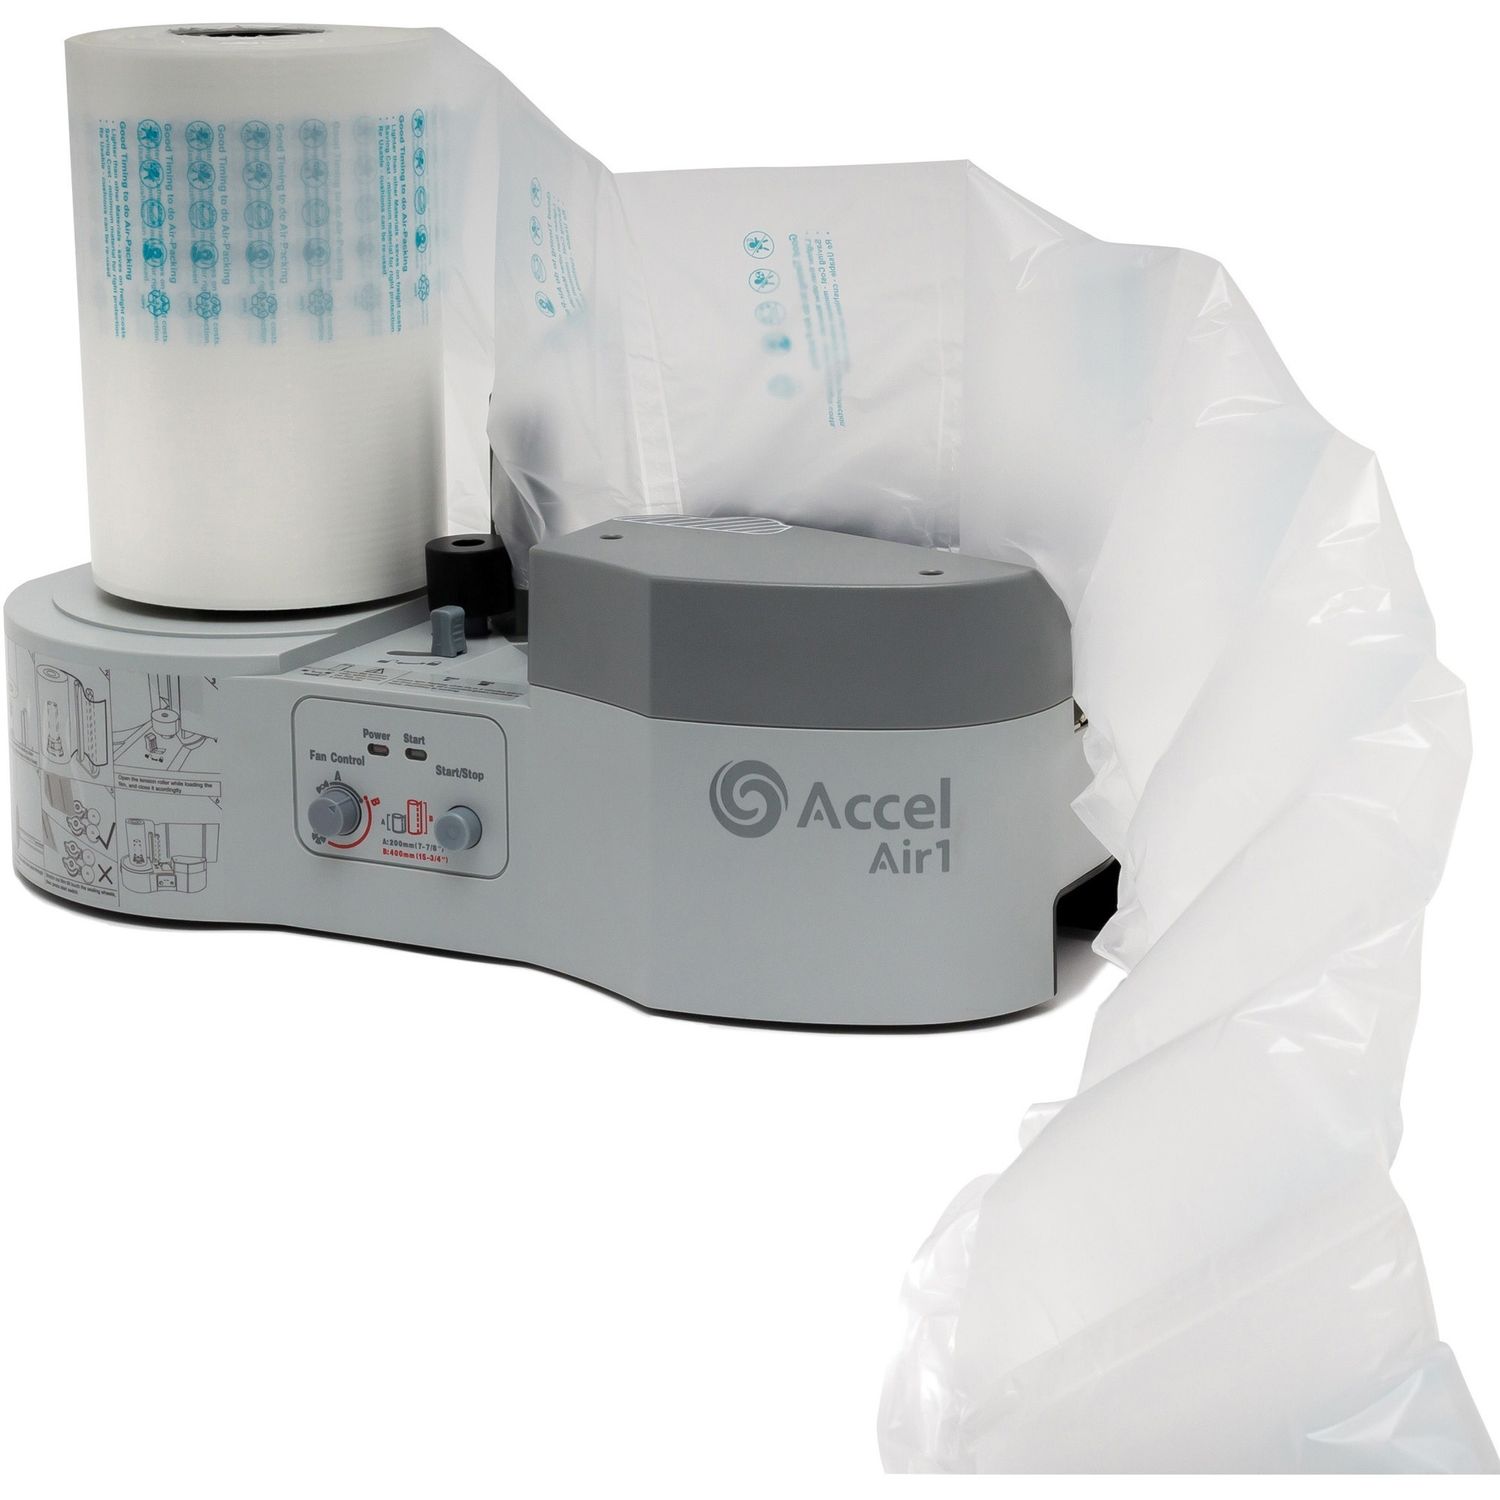 Accel Air 1 Packaging System 8.5" Width x 8.5" Height x 18" Length, 1 Each, Gray